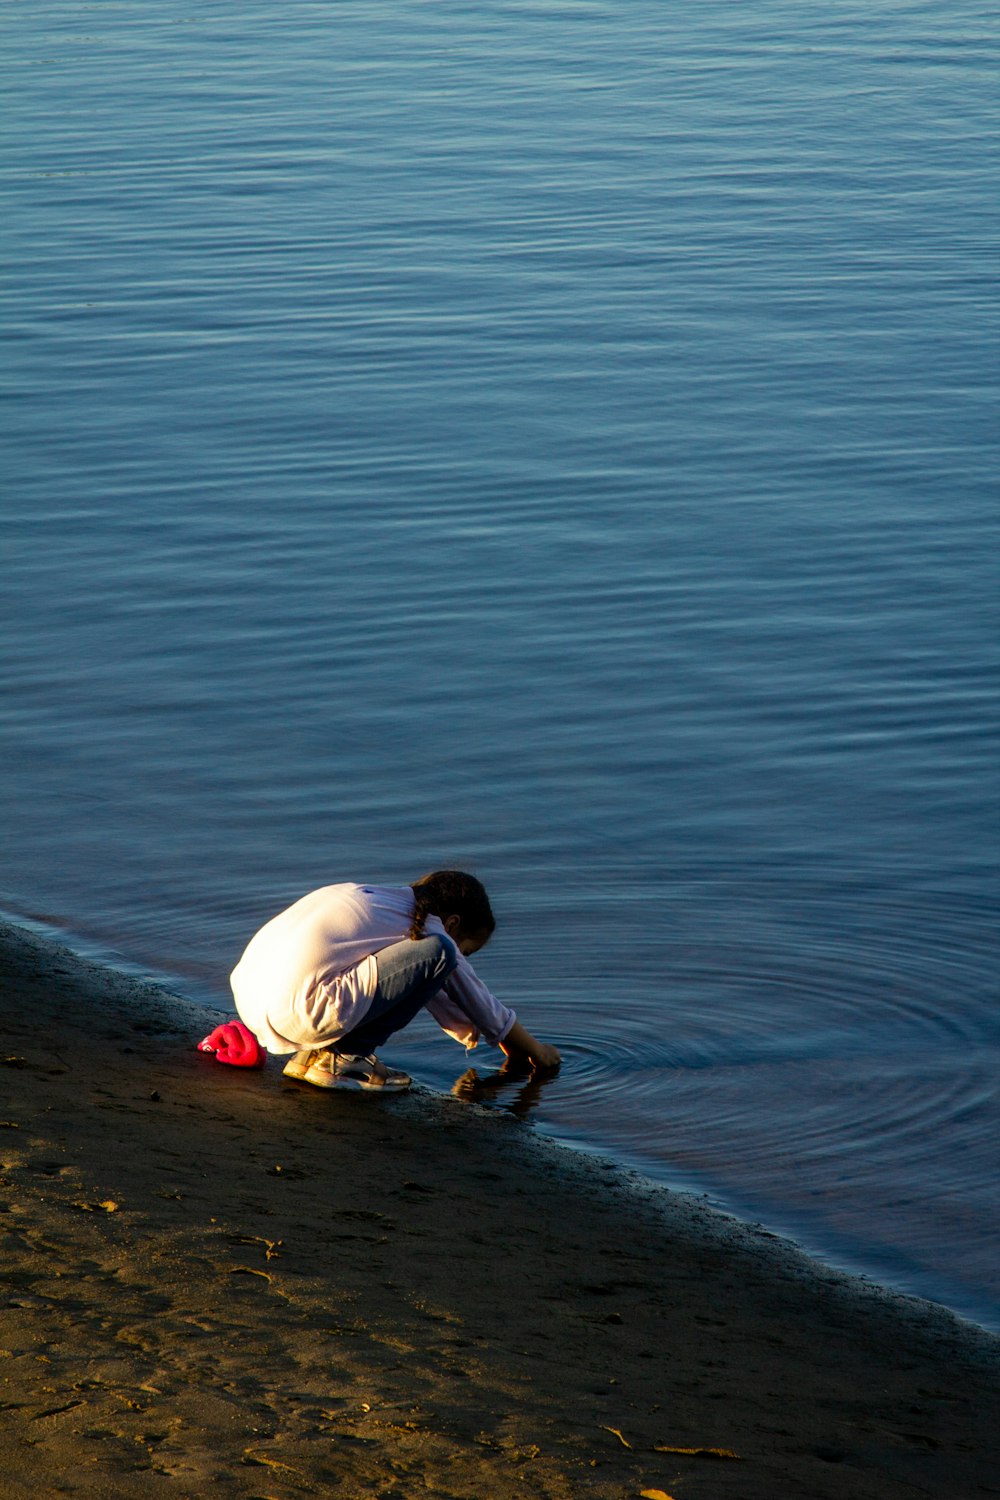 child in white shirt and brown shorts sitting on water during daytime